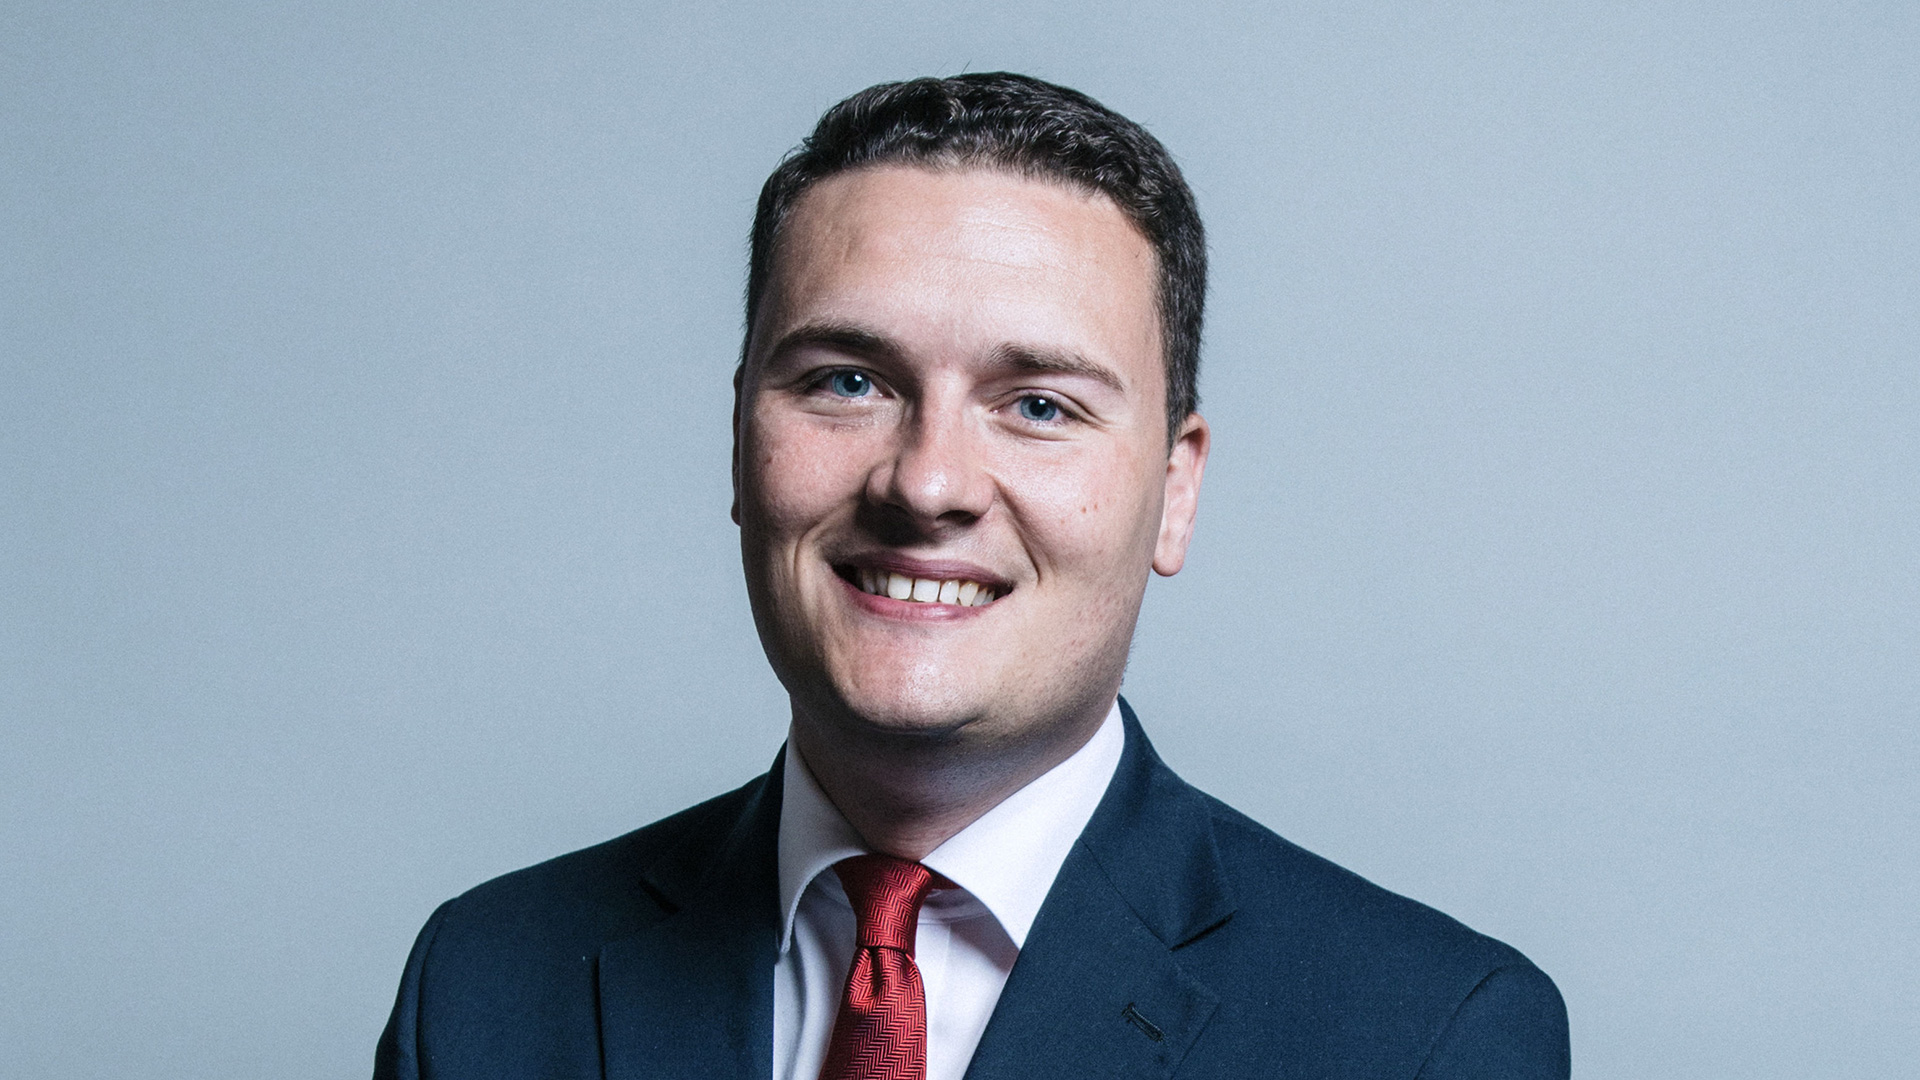 Labour shadow secretary of state for health and social care Wes Streeting